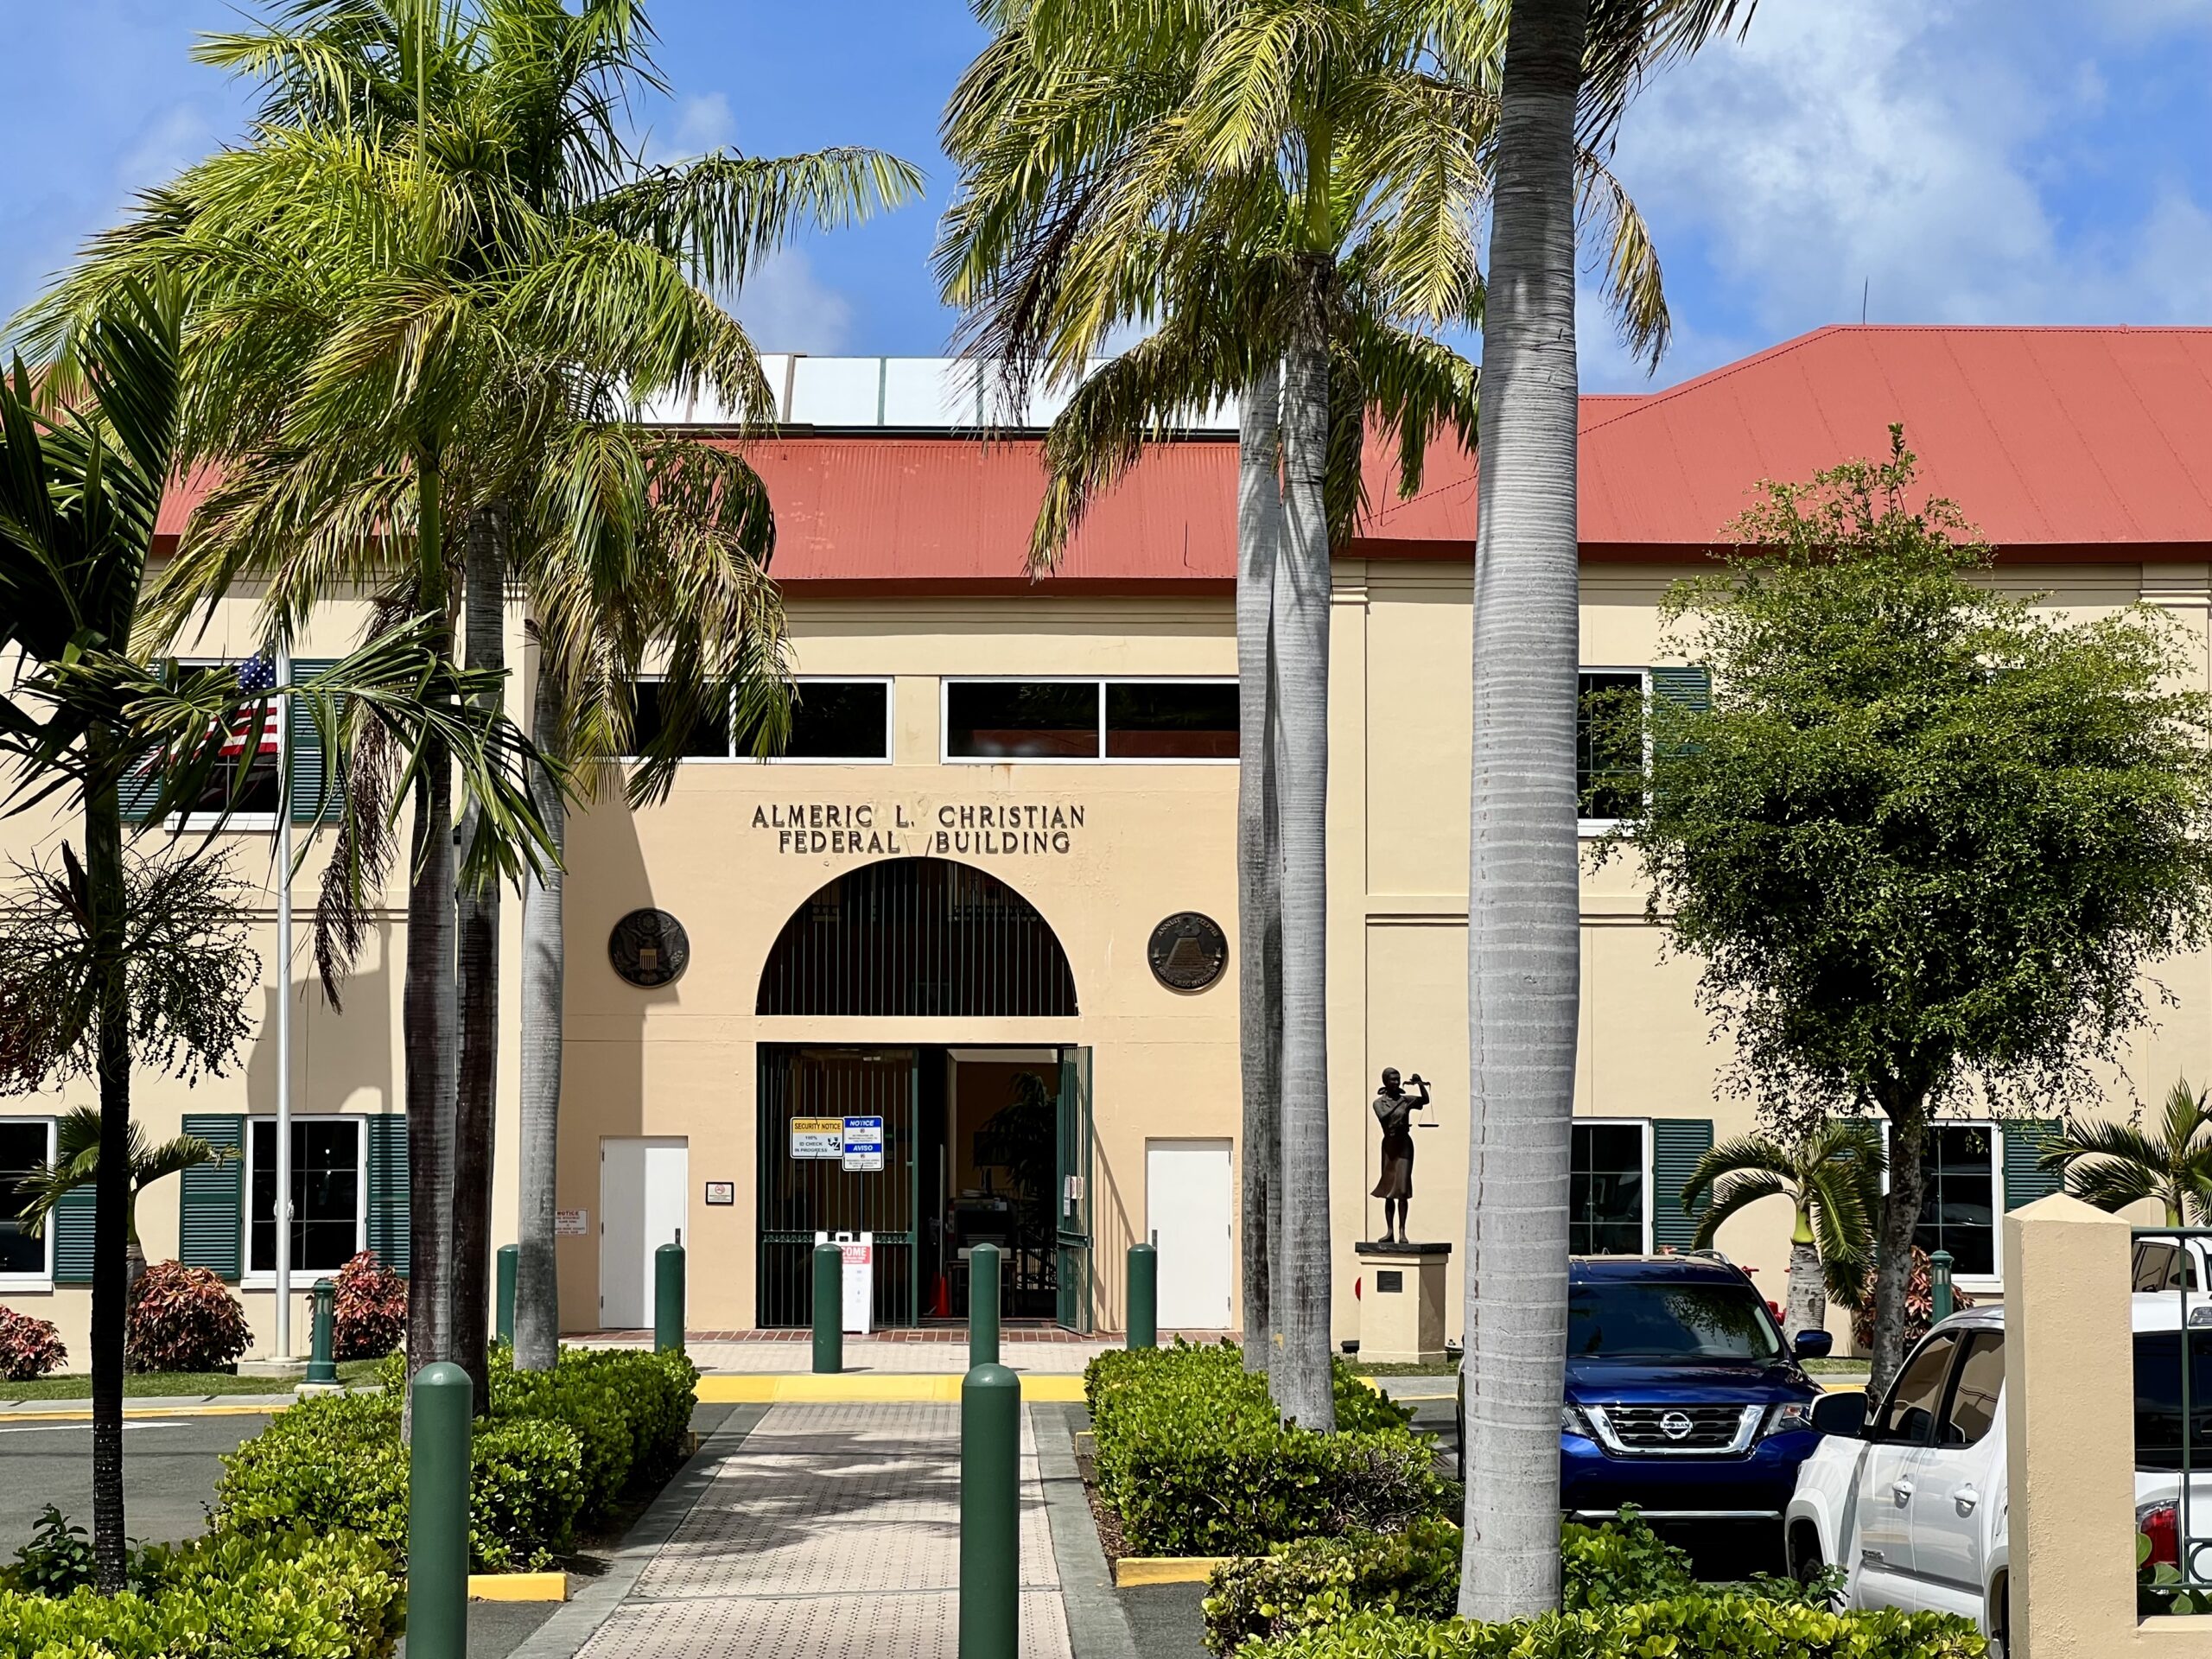 The Almeric L. Christian Federal Building on St. Croix. (Source photo by Linda Morland)